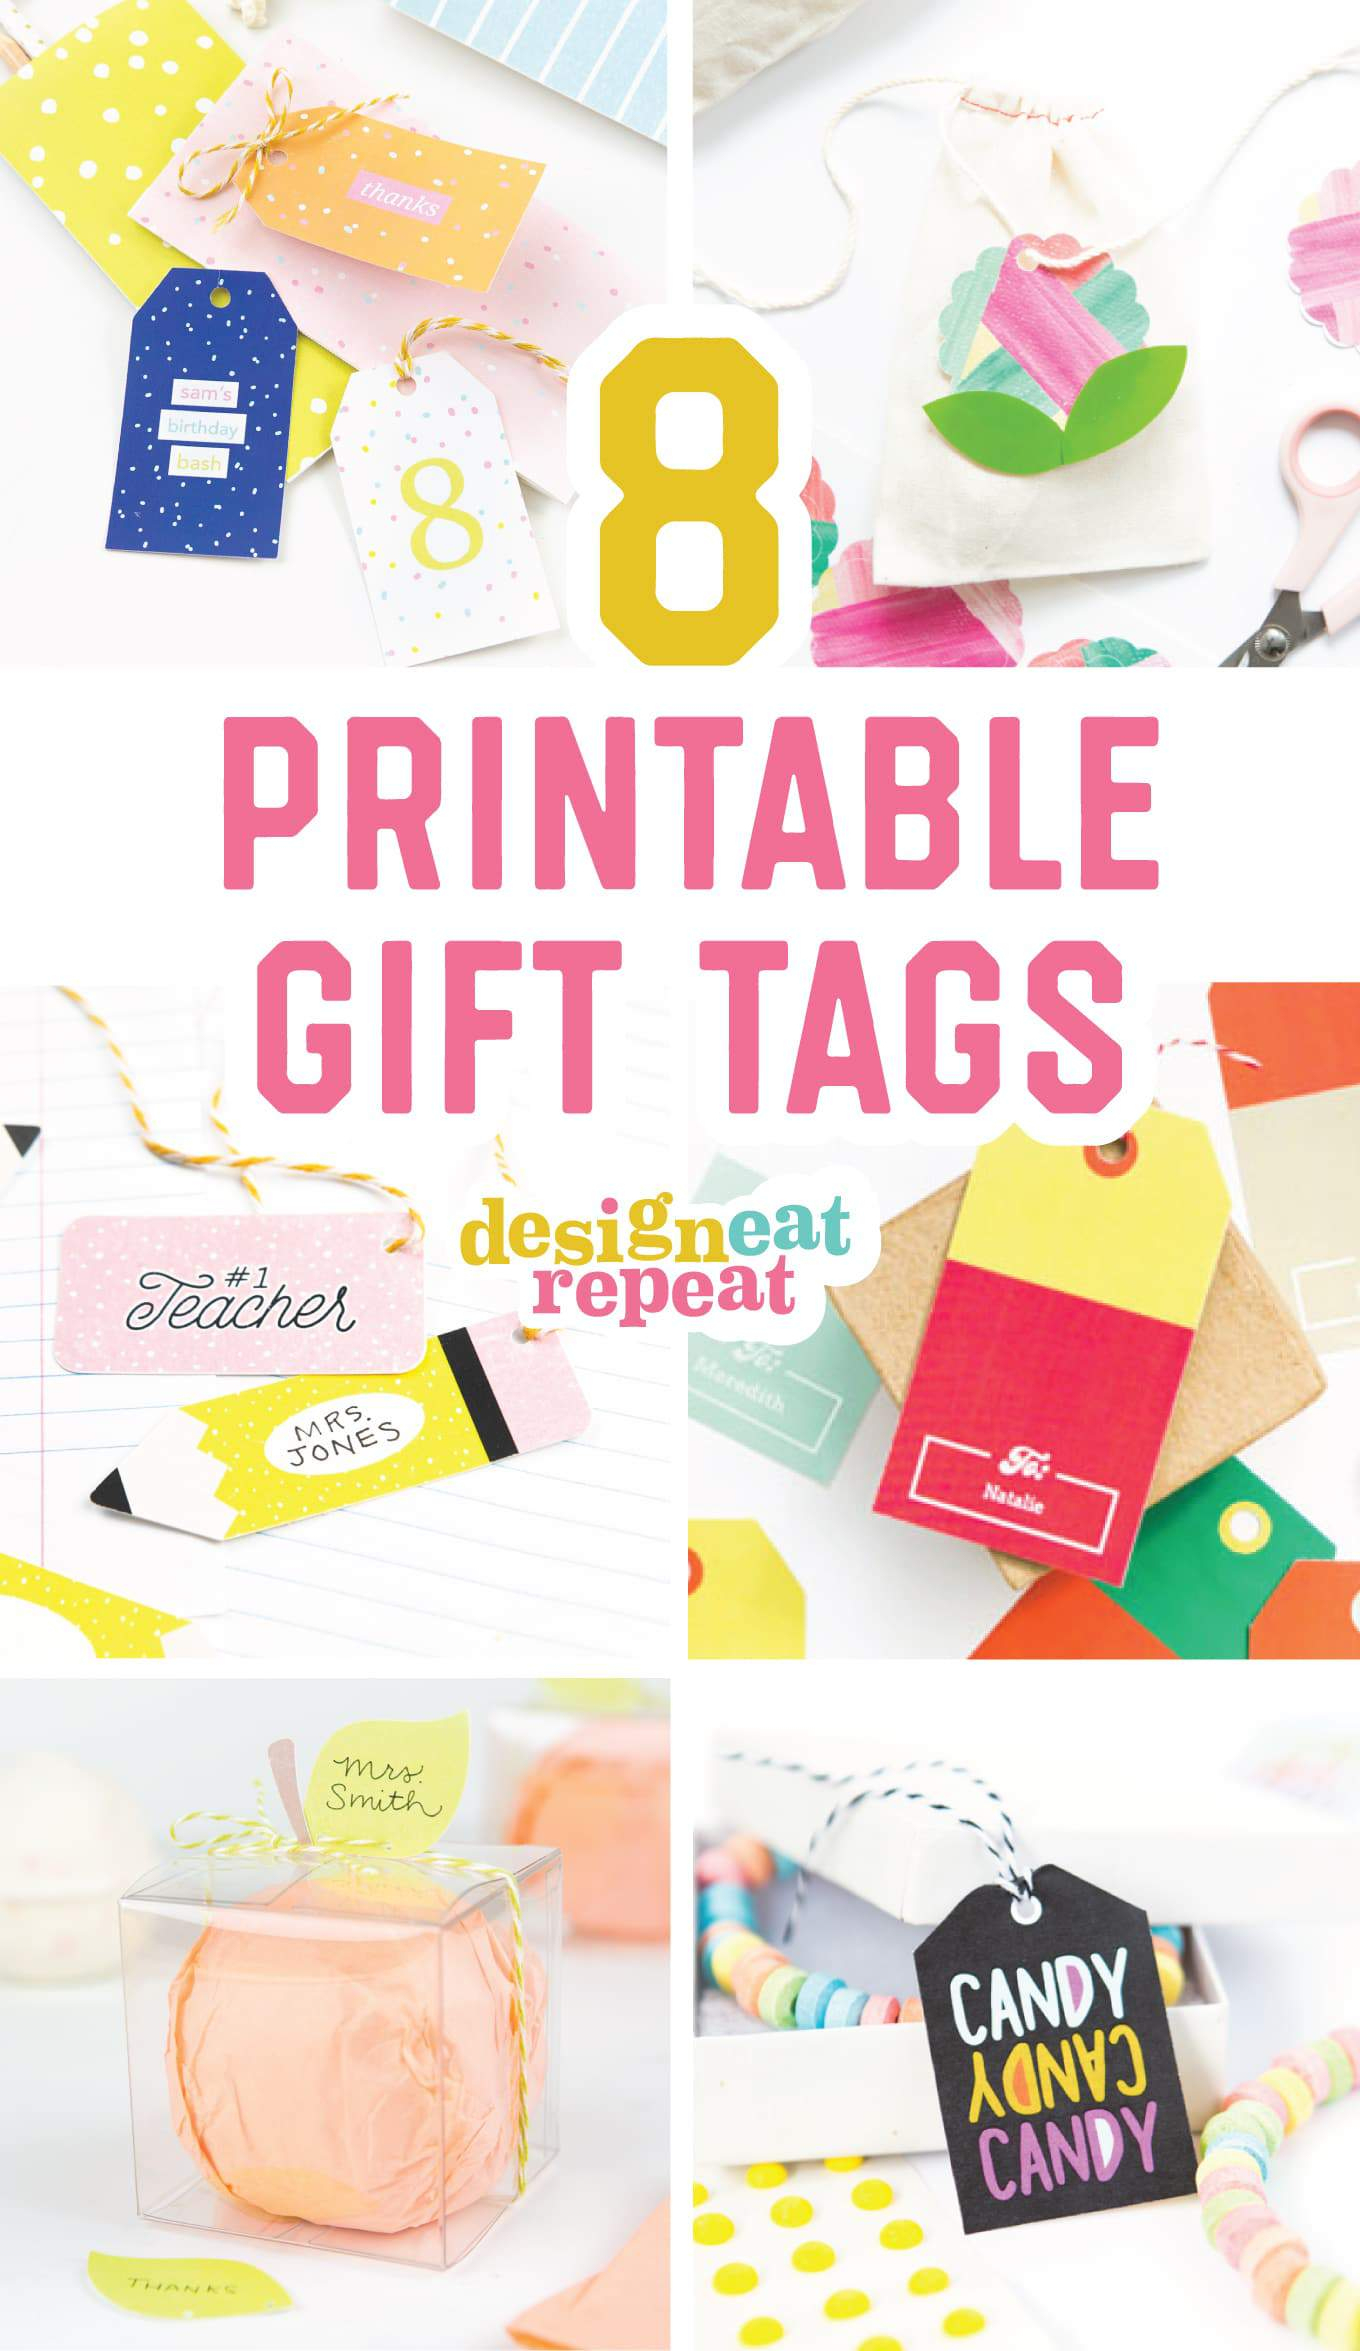 free-online-gift-tags-maker-design-a-custom-gift-tag-canva-free-printable-gift-tags